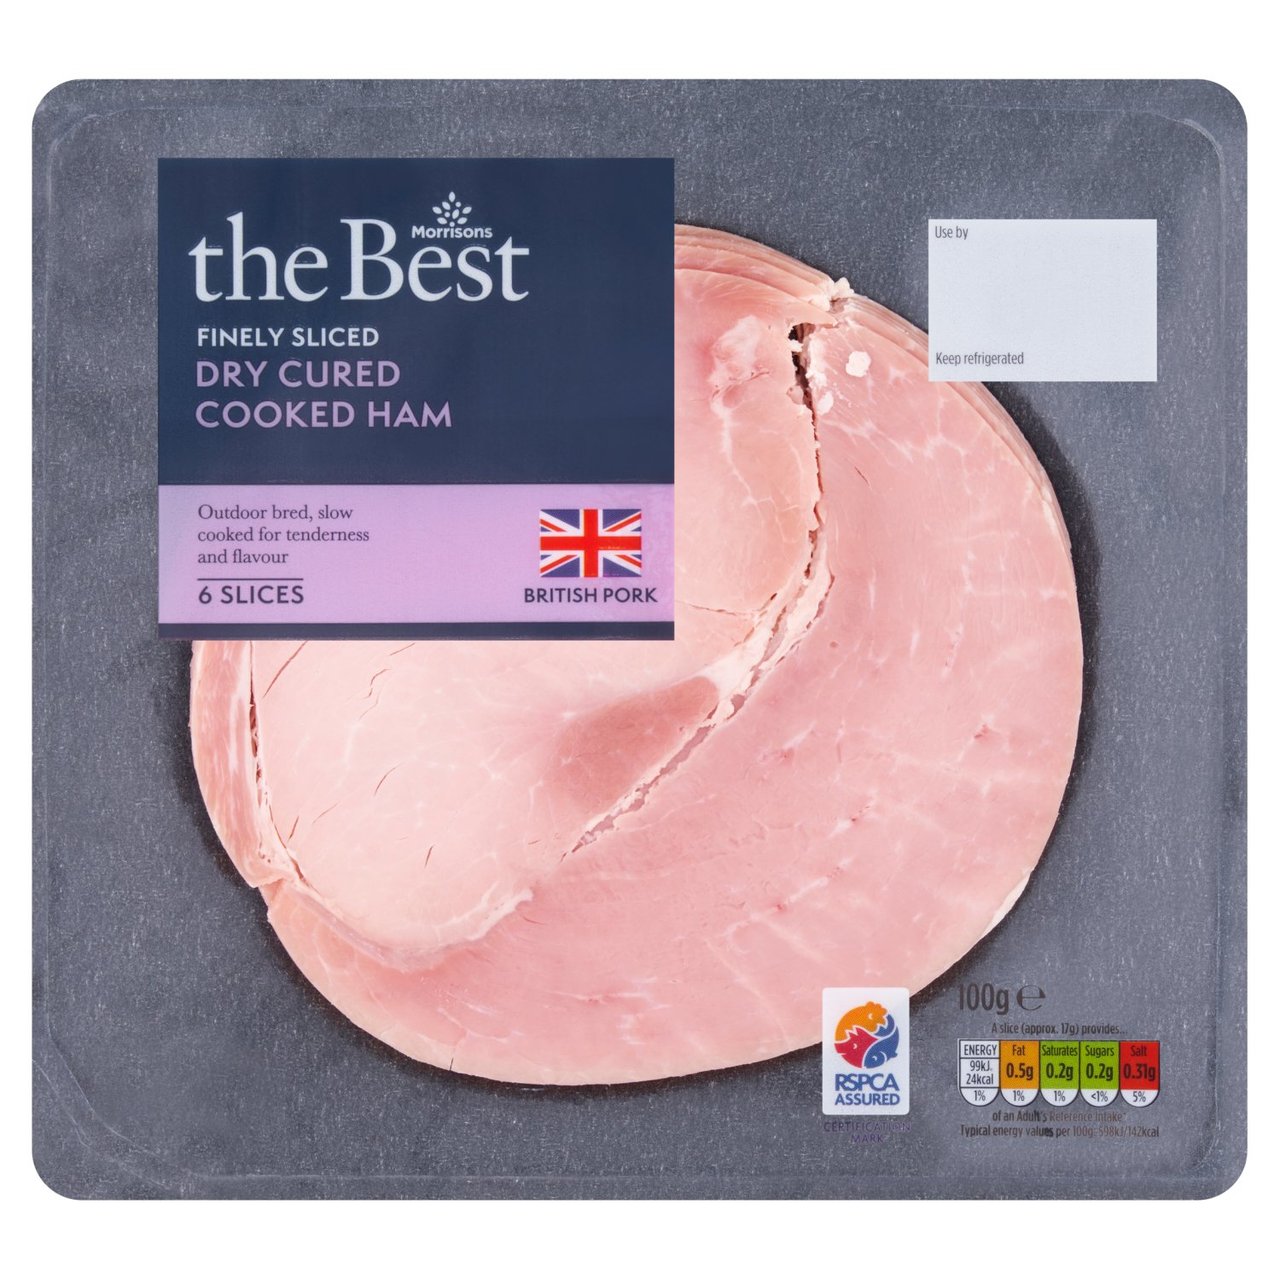 Morrisons The Best Finely Sliced Dry Cured Cooked Ham